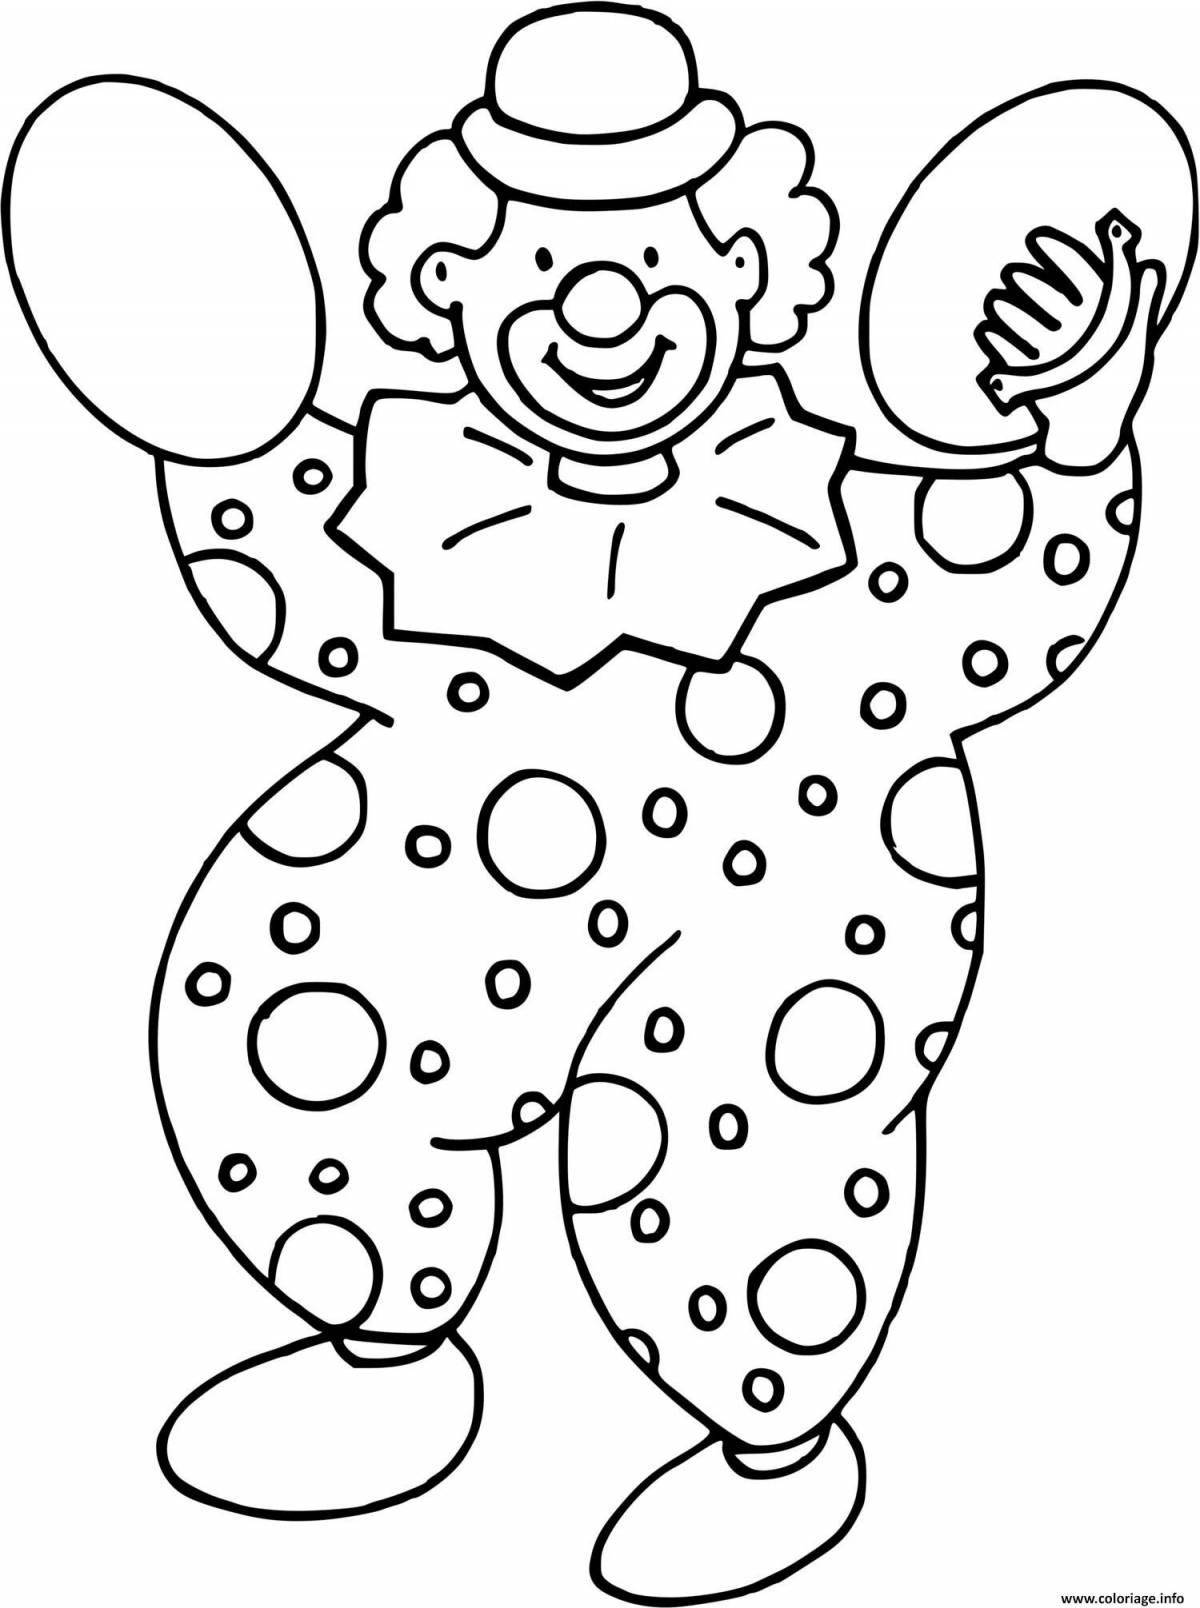 A fun clown coloring book for 6-7 year olds